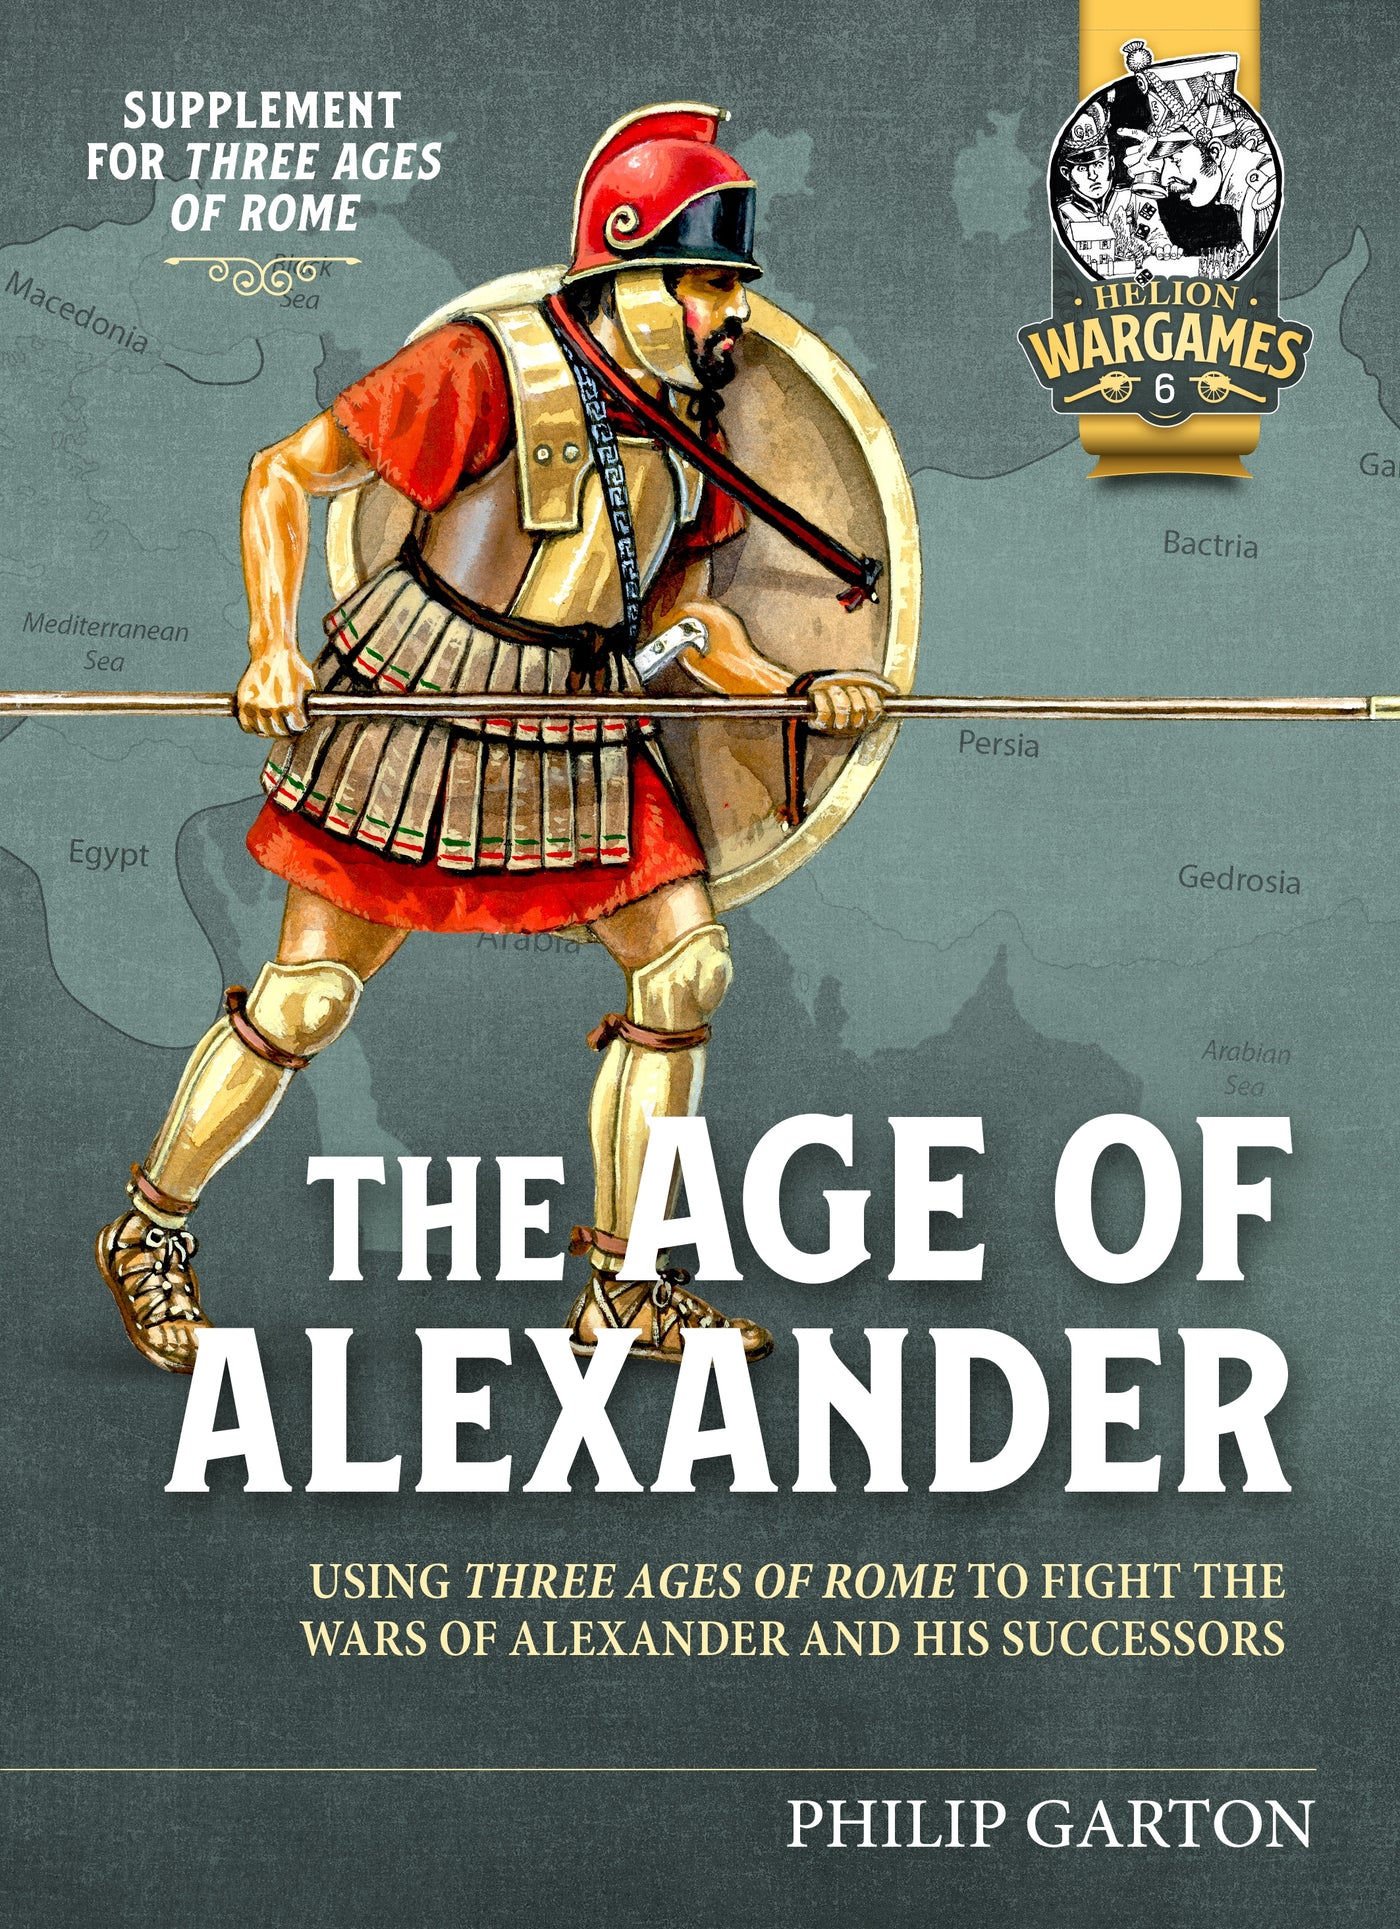 The Age of Alexander